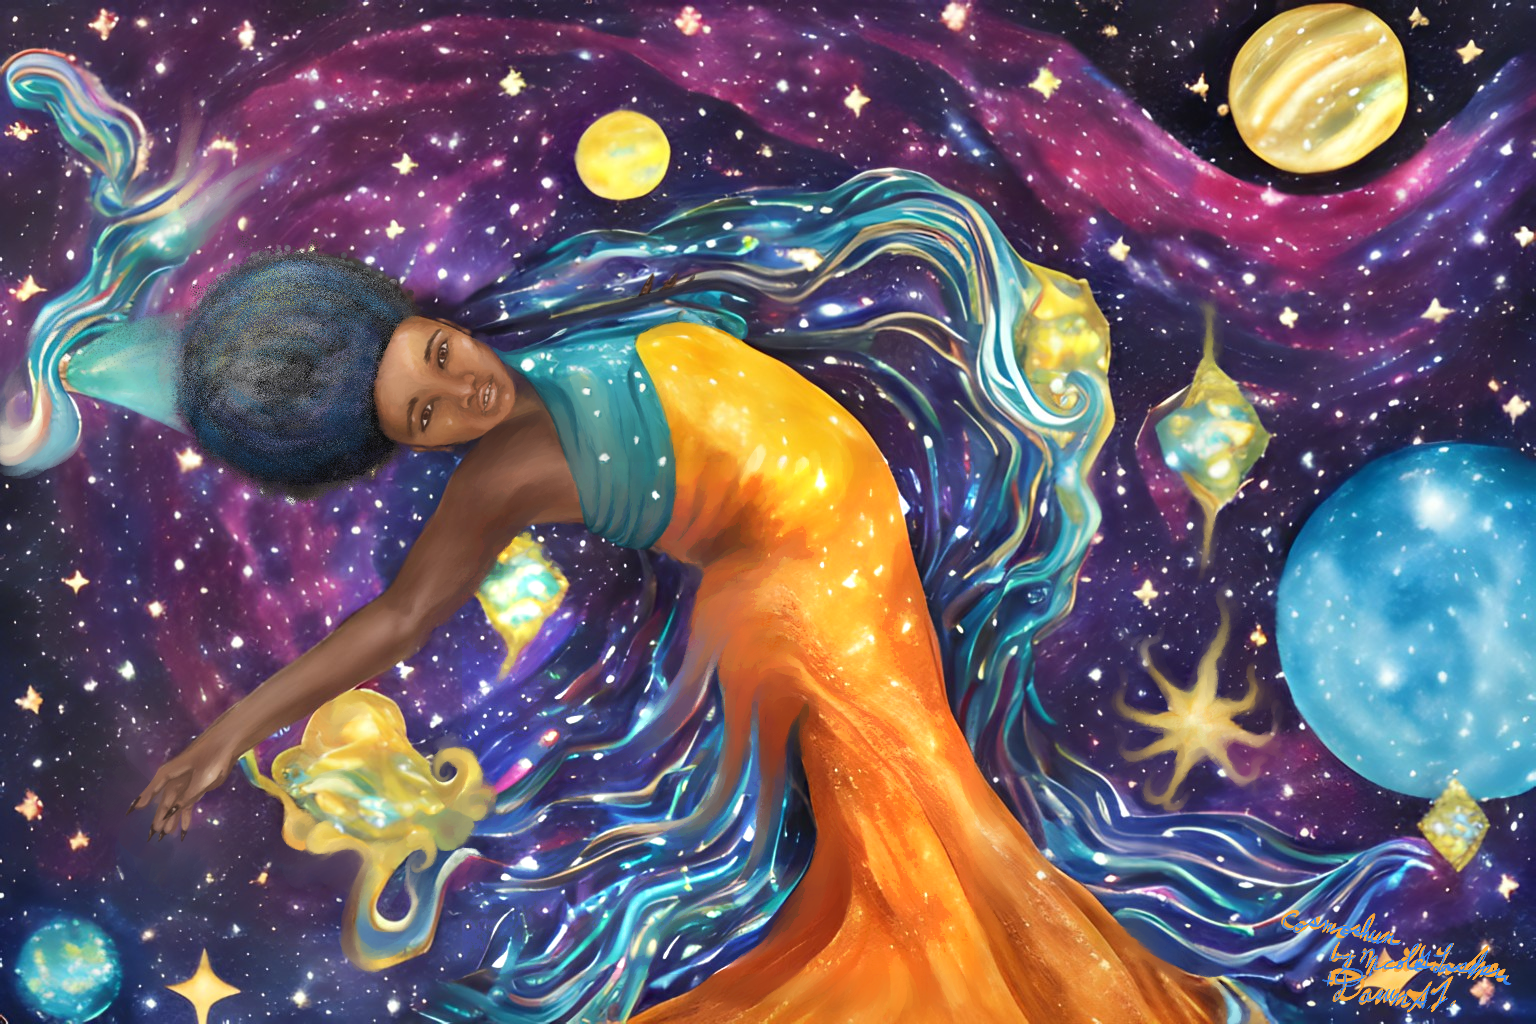 Cosmosa by Nicole T. Lasher, an image of a manifestation of the cosmic mother, a woman in an aqua and golden orange dress with water flowing around her among the stars.